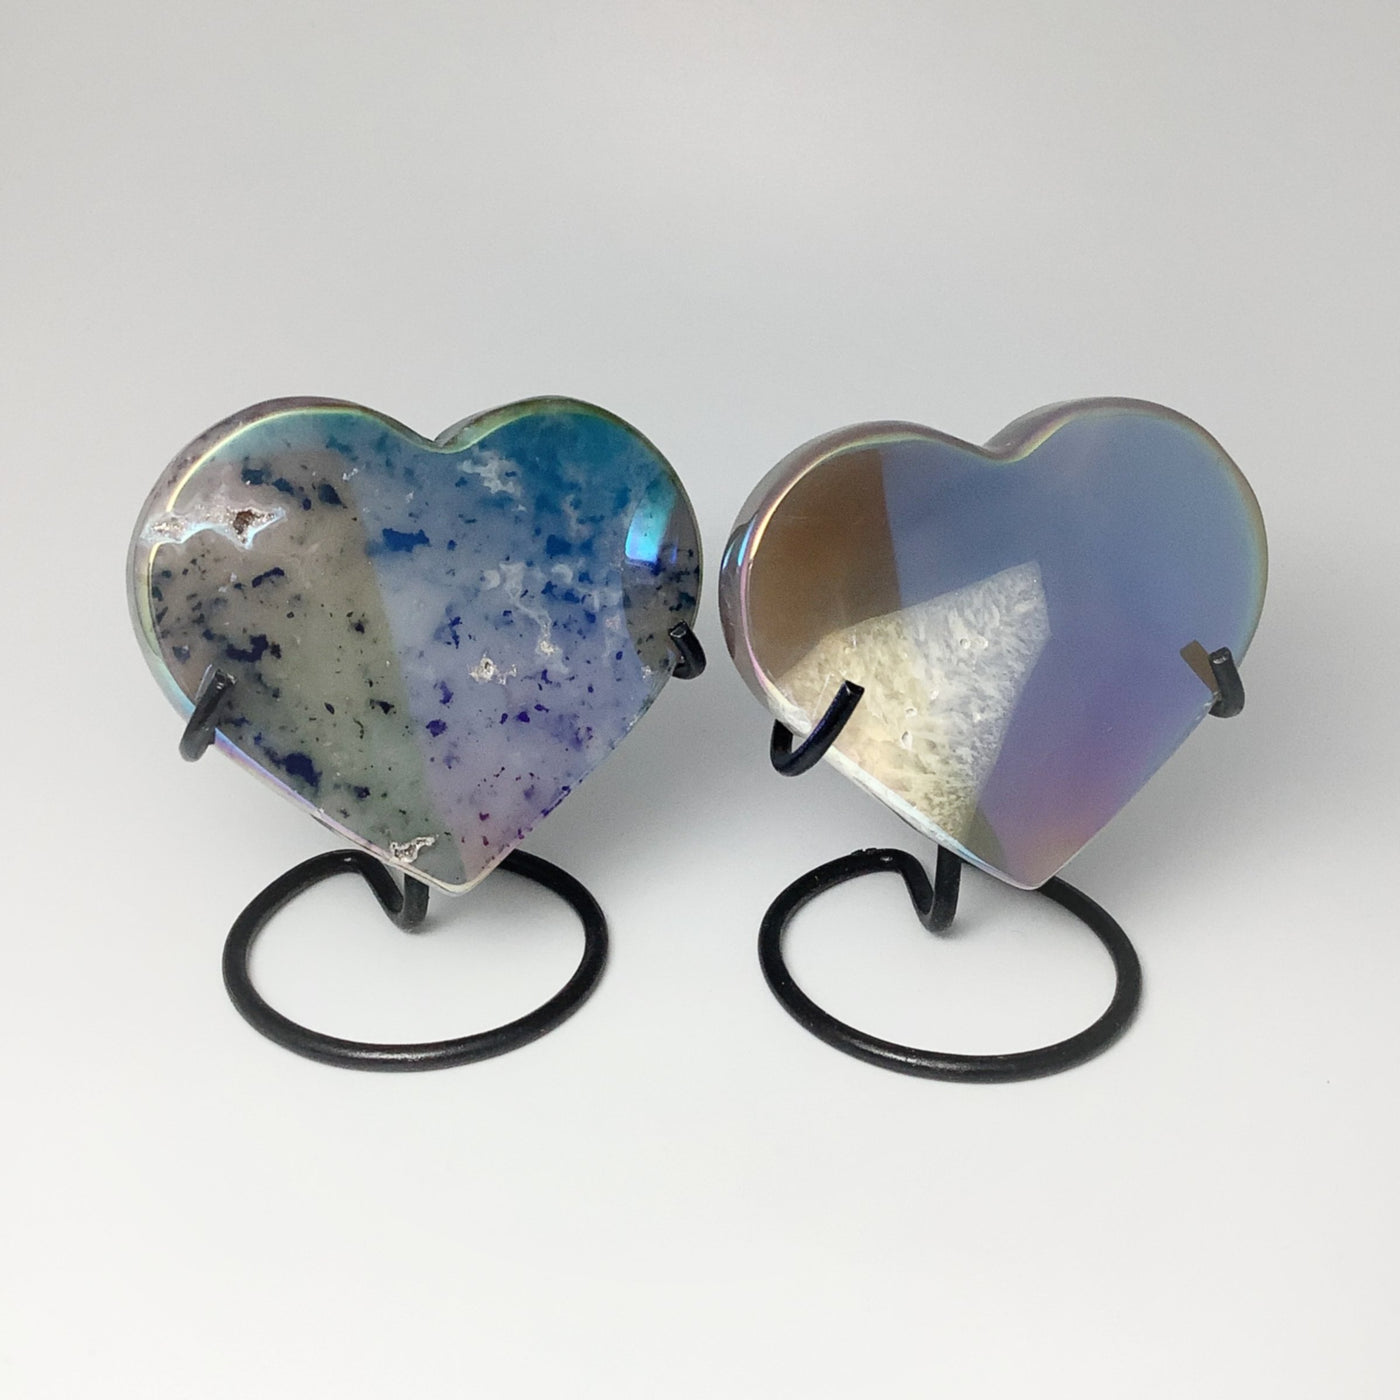 Rainbow Agate Heart on Stand at $59 Each